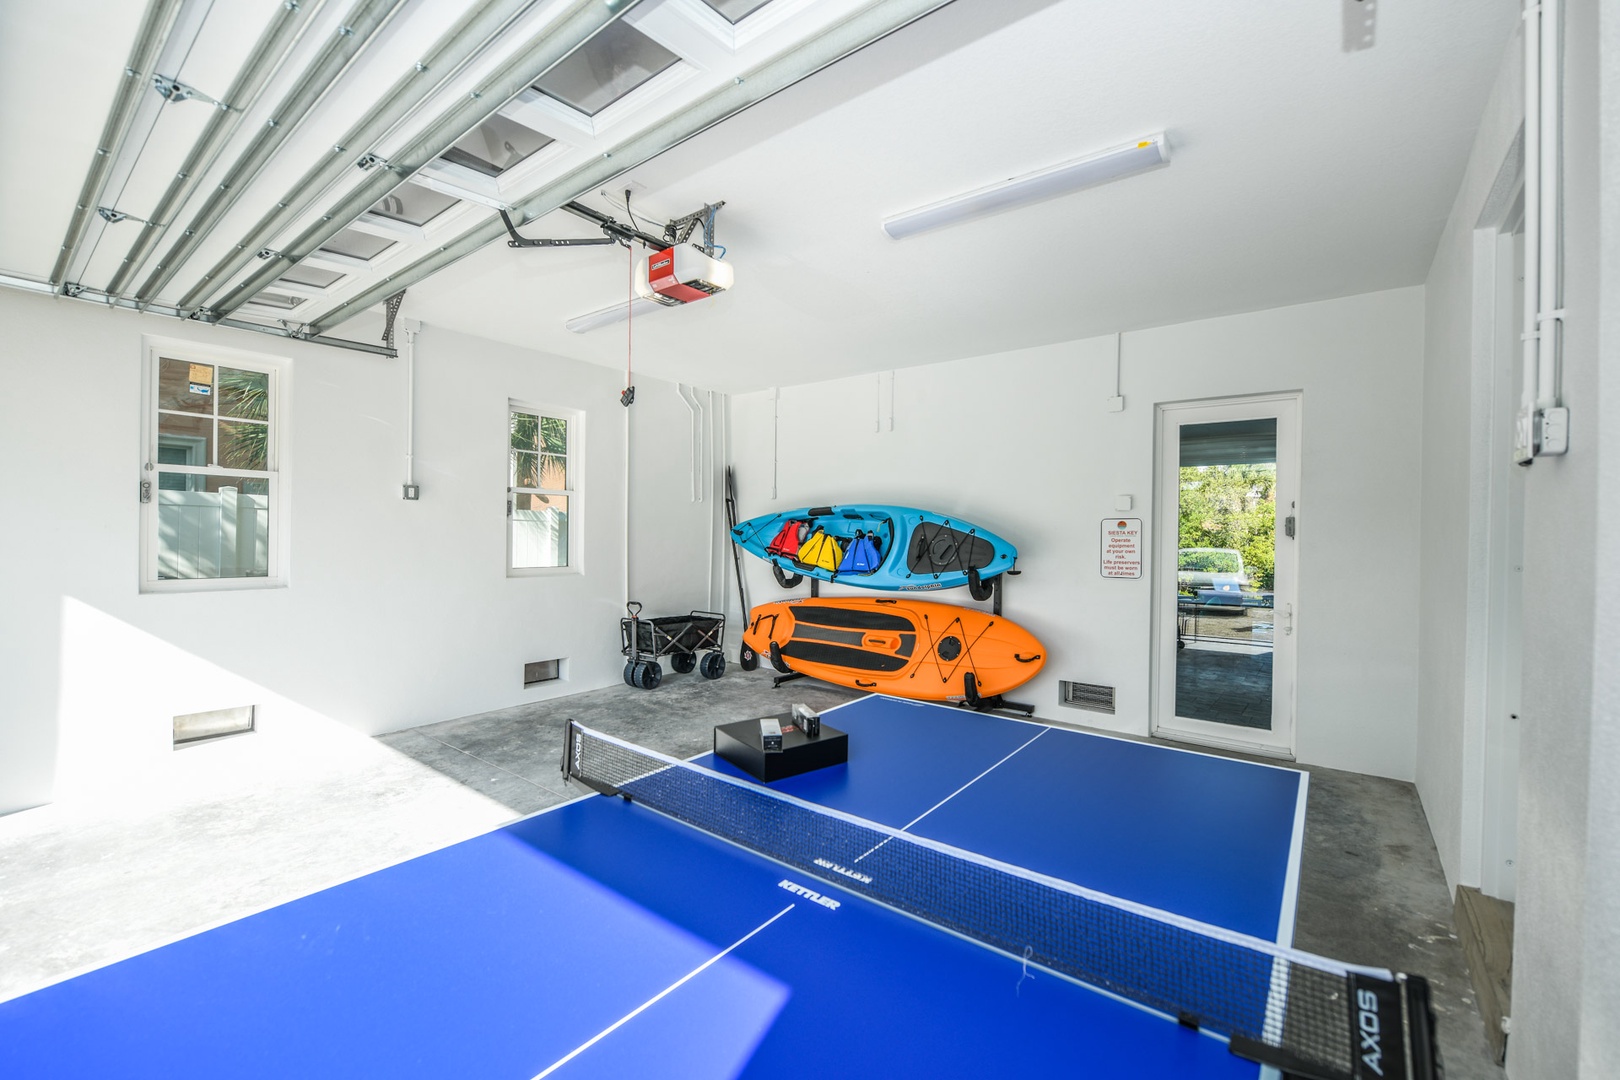 Garage area with ping pong table, kayak, and paddleboard